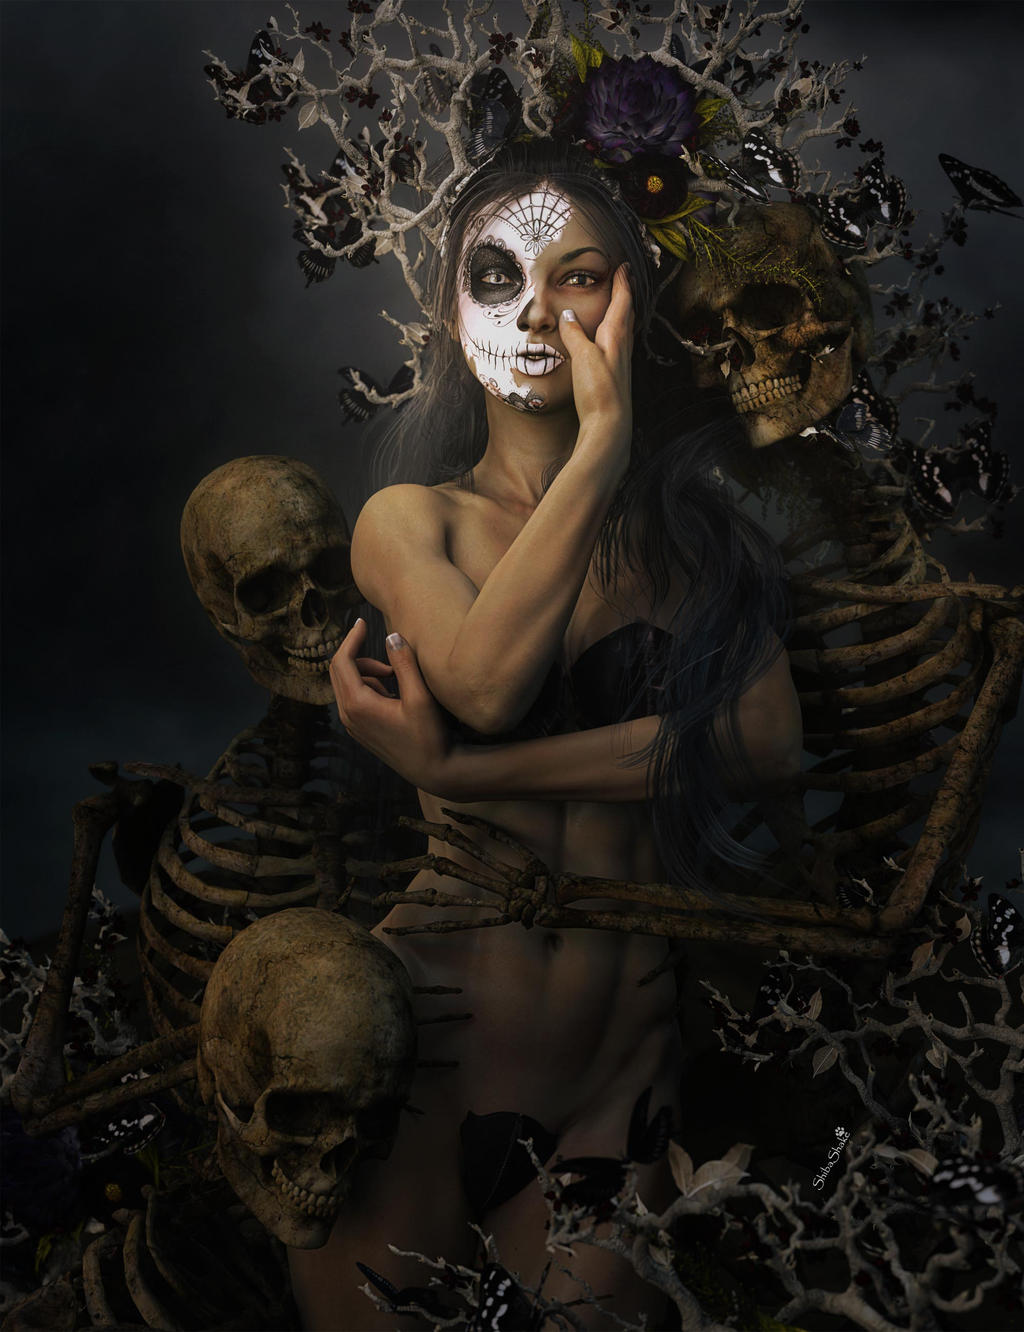 Duality of life and death represented by a day of the dead girl with black flowers and butterflies on her headdress surrounded by skeletons. Gothic fantasy woman art. Daz Studio Iray image.